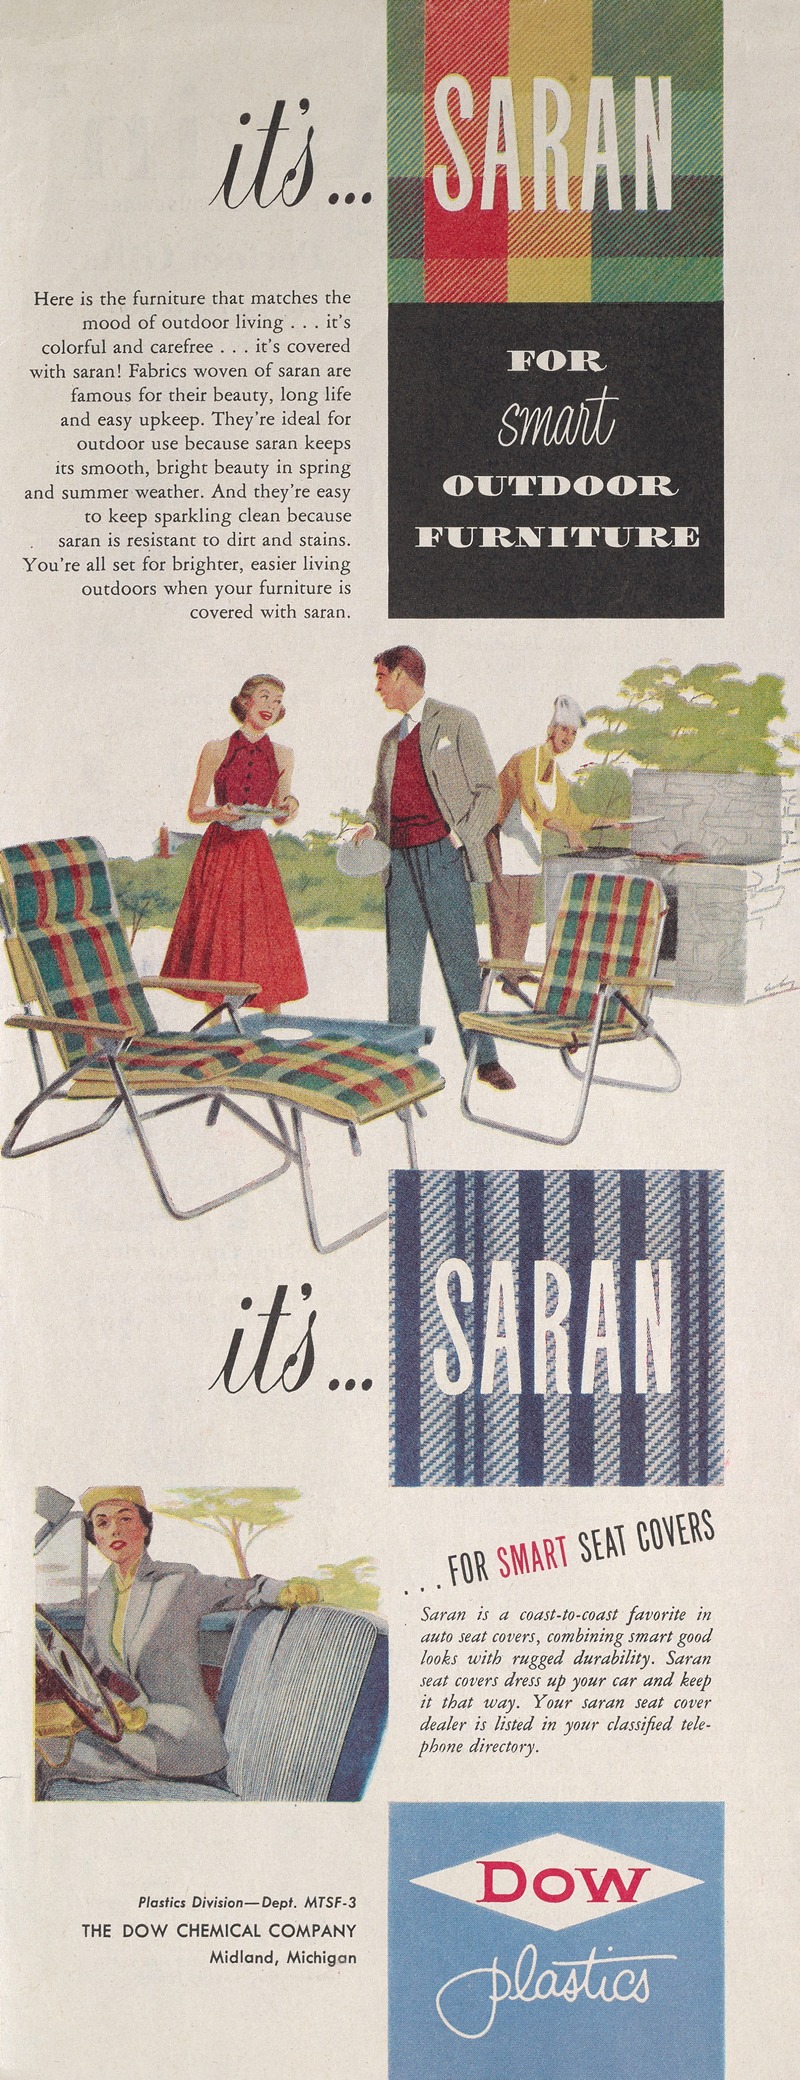 Dow Chemical Company - It’s…SARAN…for Smart Outdoor Furniture…It’s…SARAN…for Smart Seat Covers